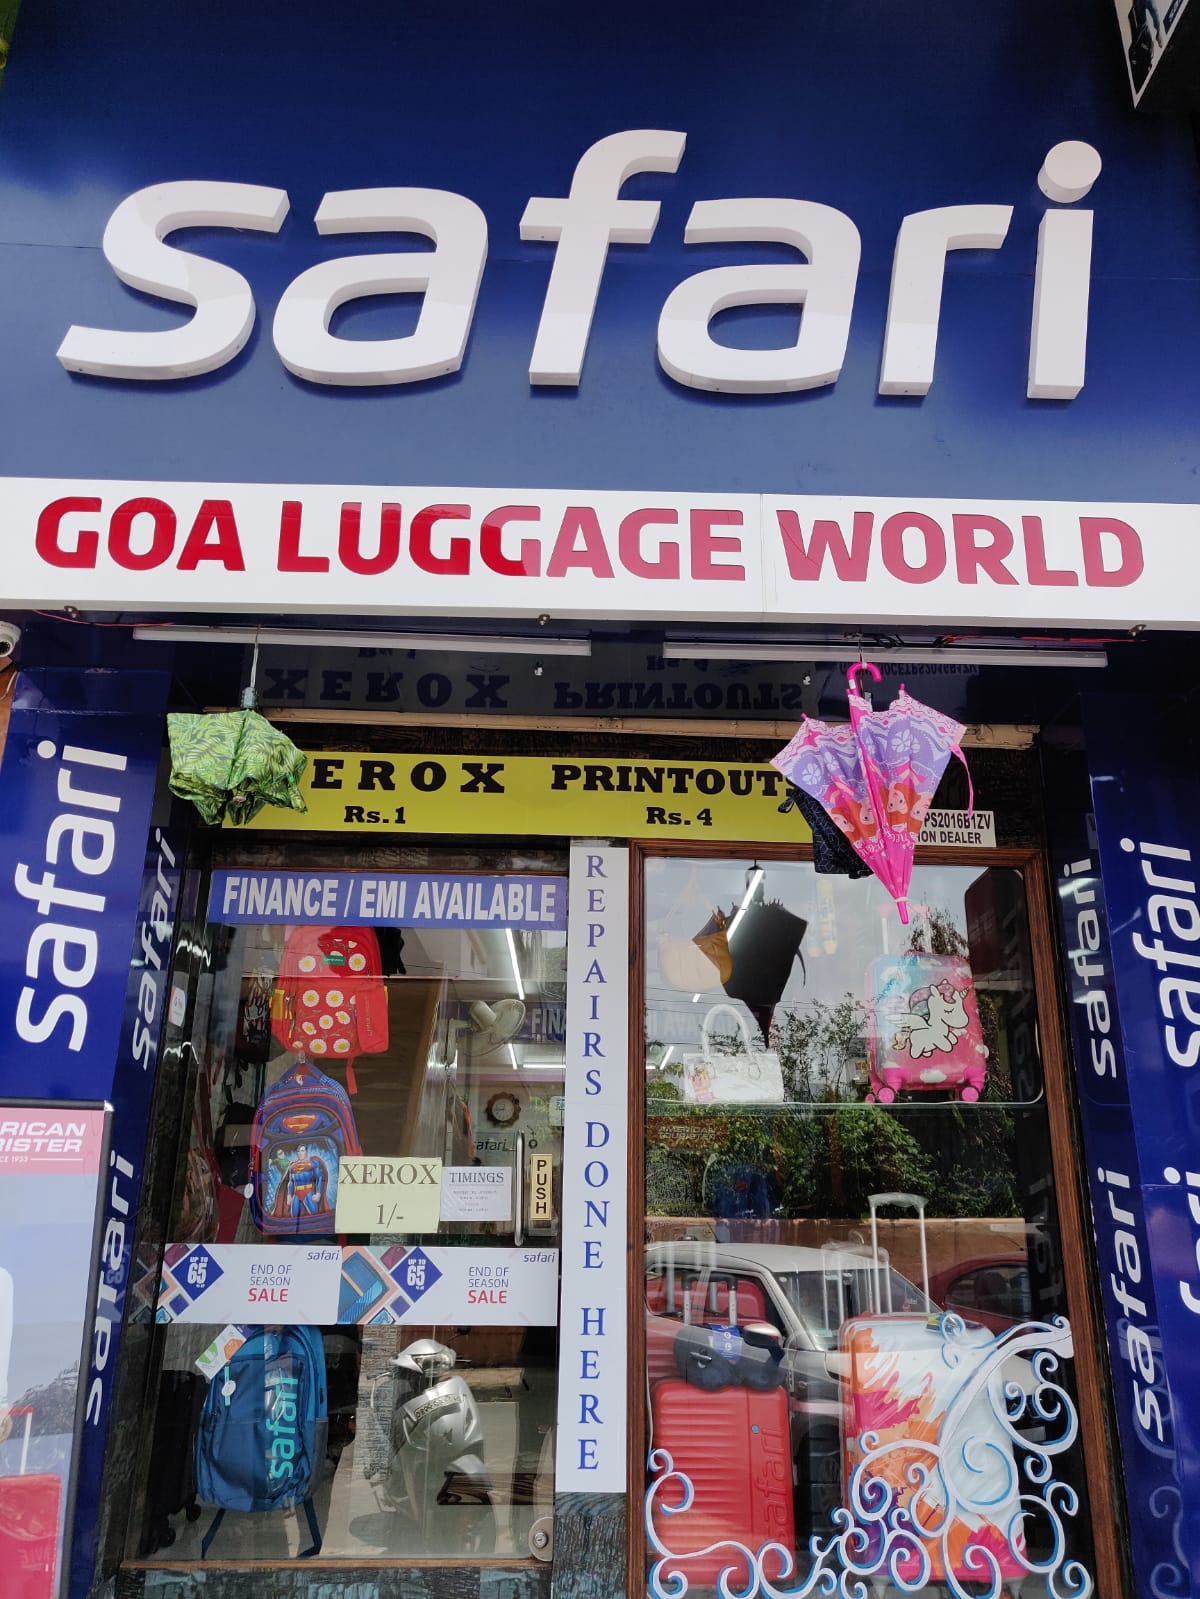 Goa Luggage World Suppliers in Bags and other luggage Products